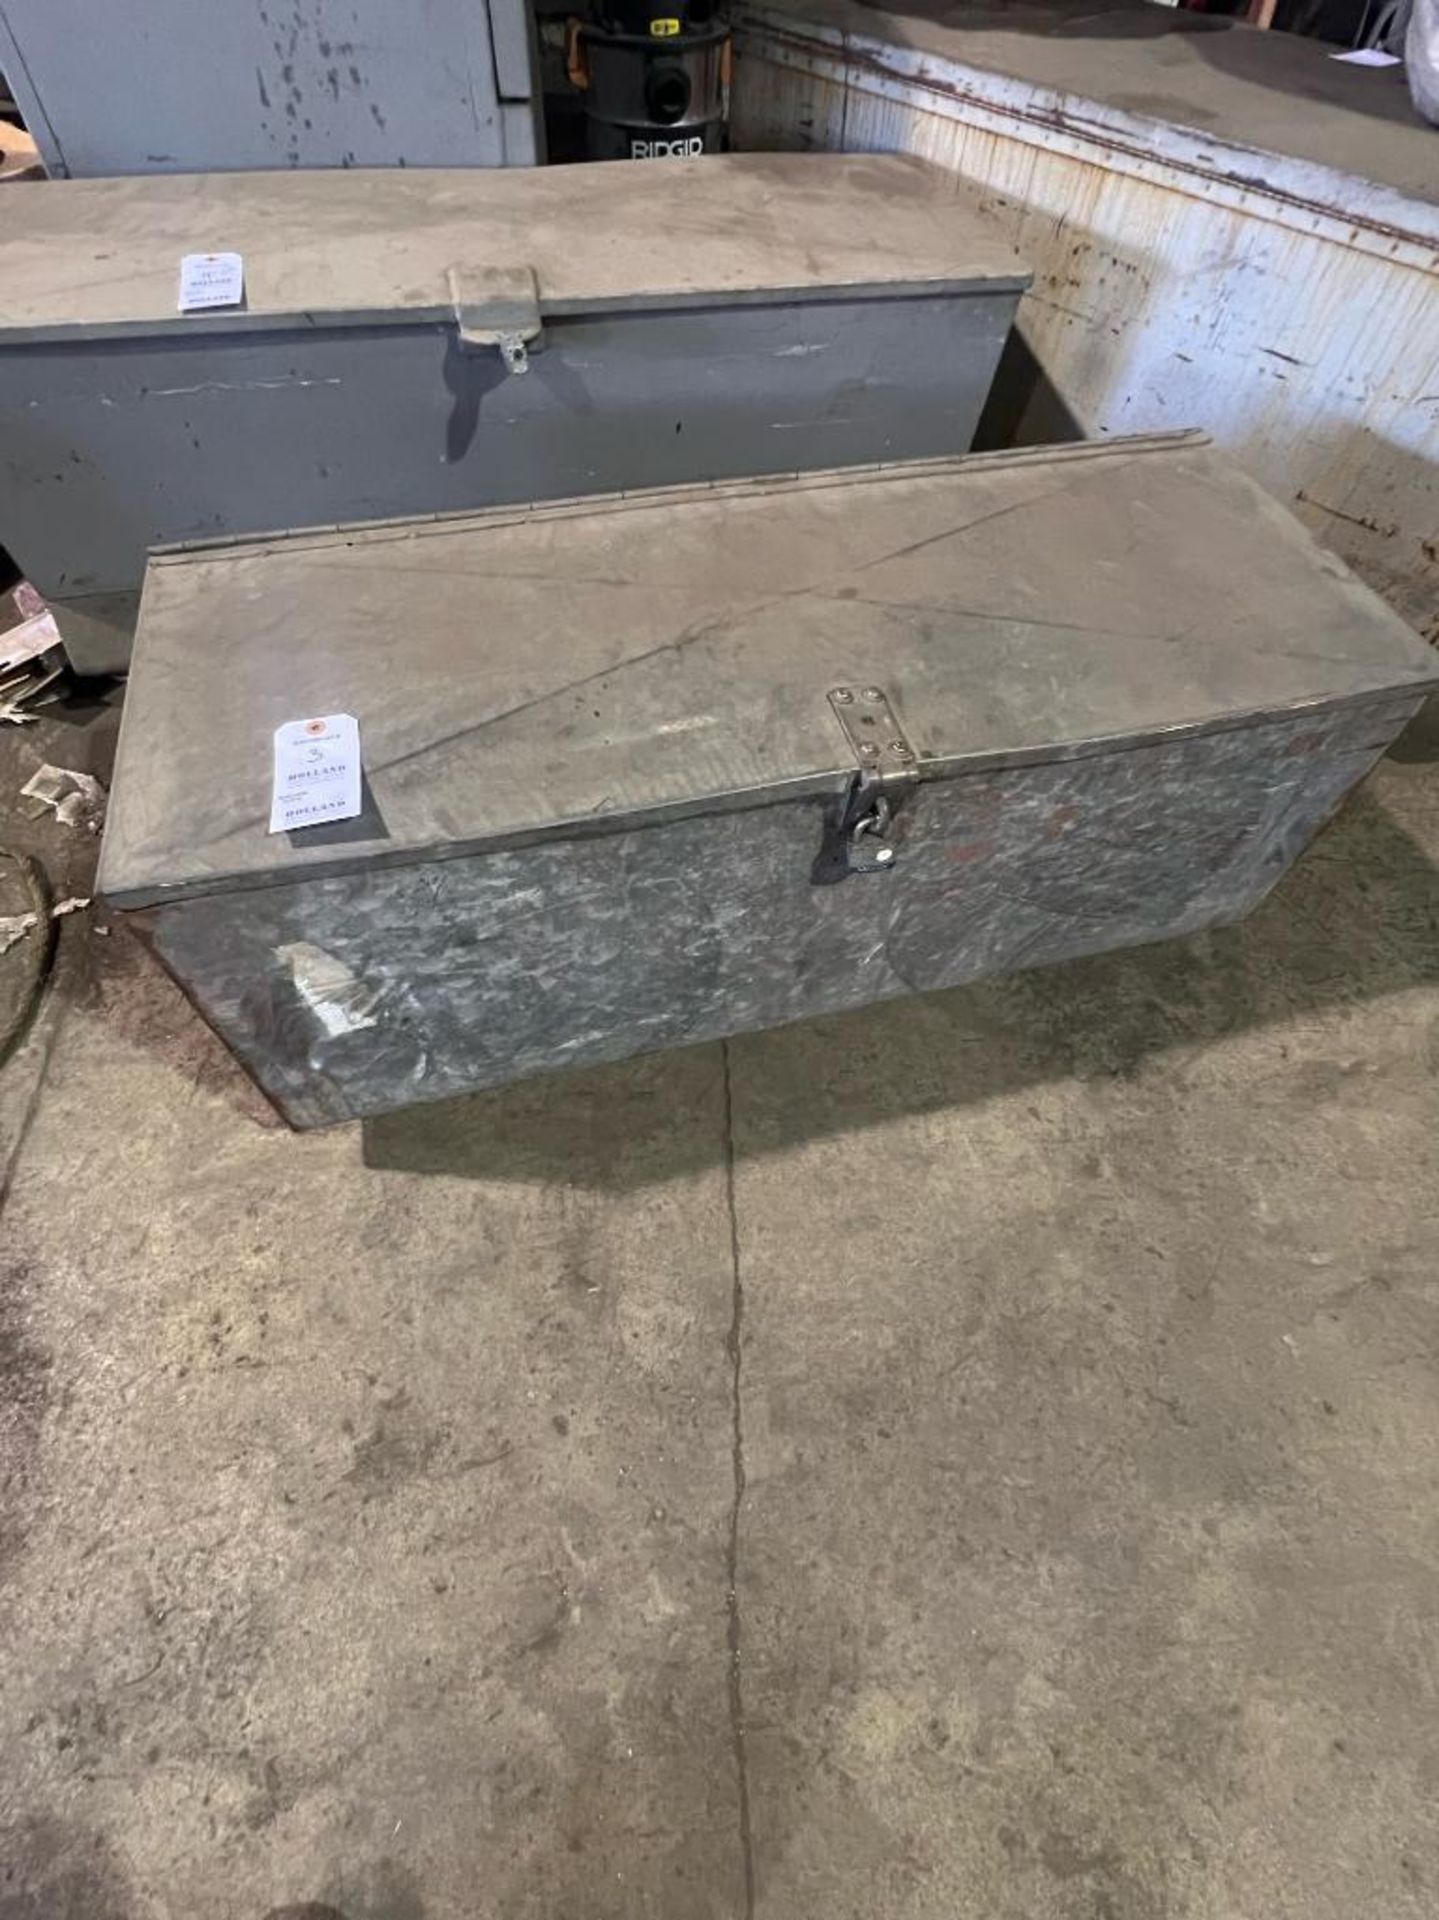 17" X 48" Metal Tool Box on Casters sold with contents / Gaskets Material